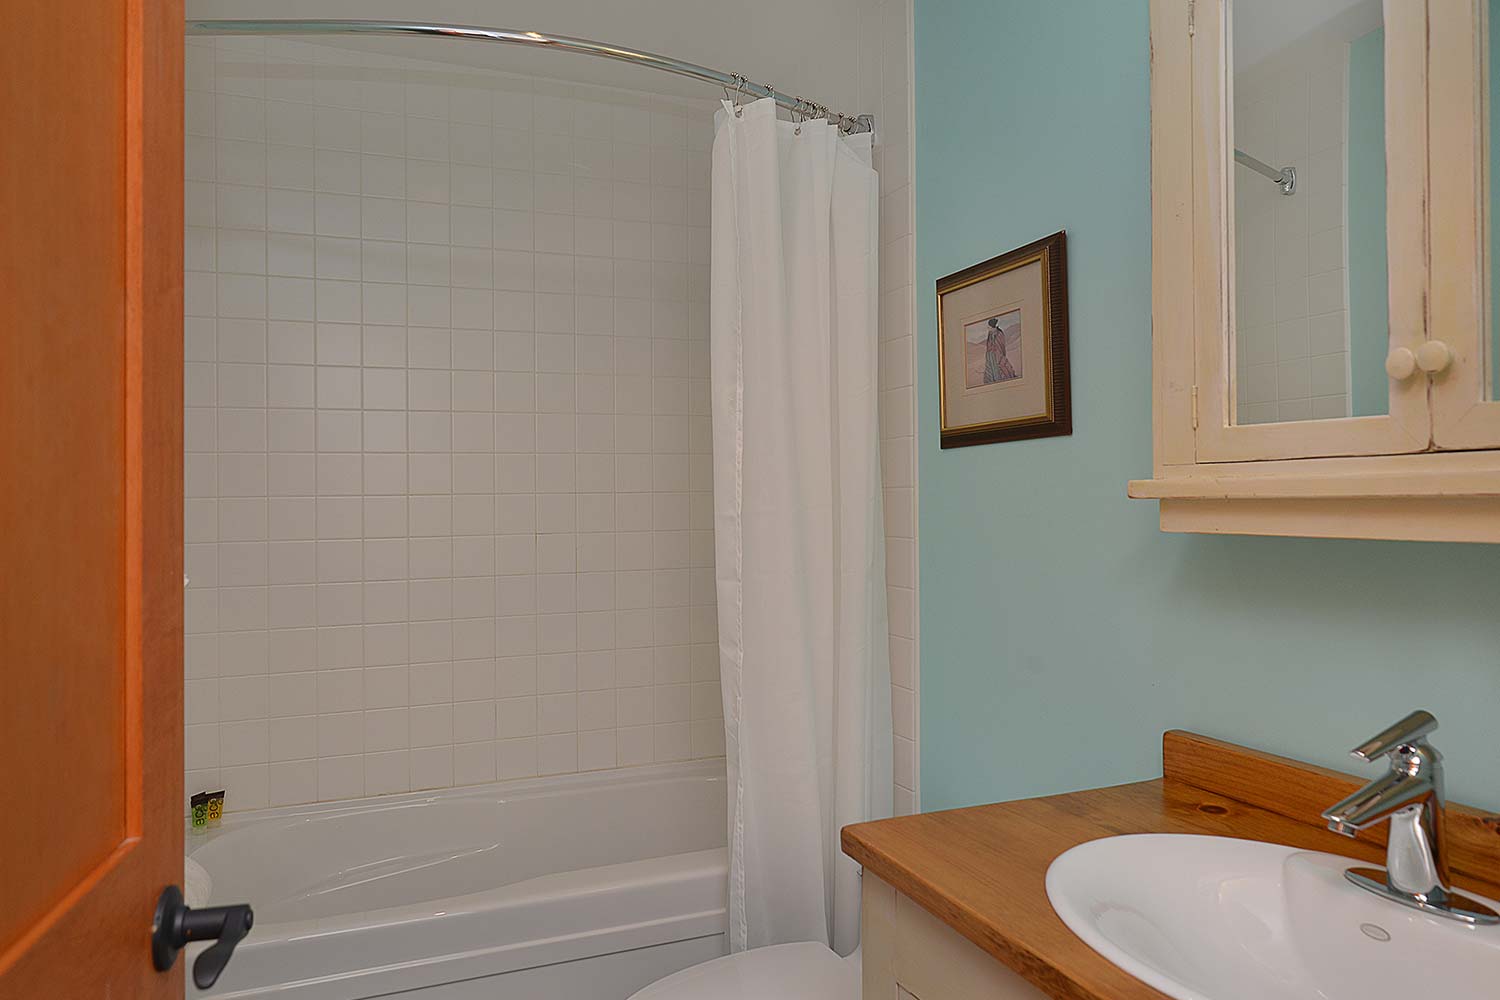 The large tub and shower in the Garden Suite bathroom of House 65 - a furnished home for rent on Pender Harbour.